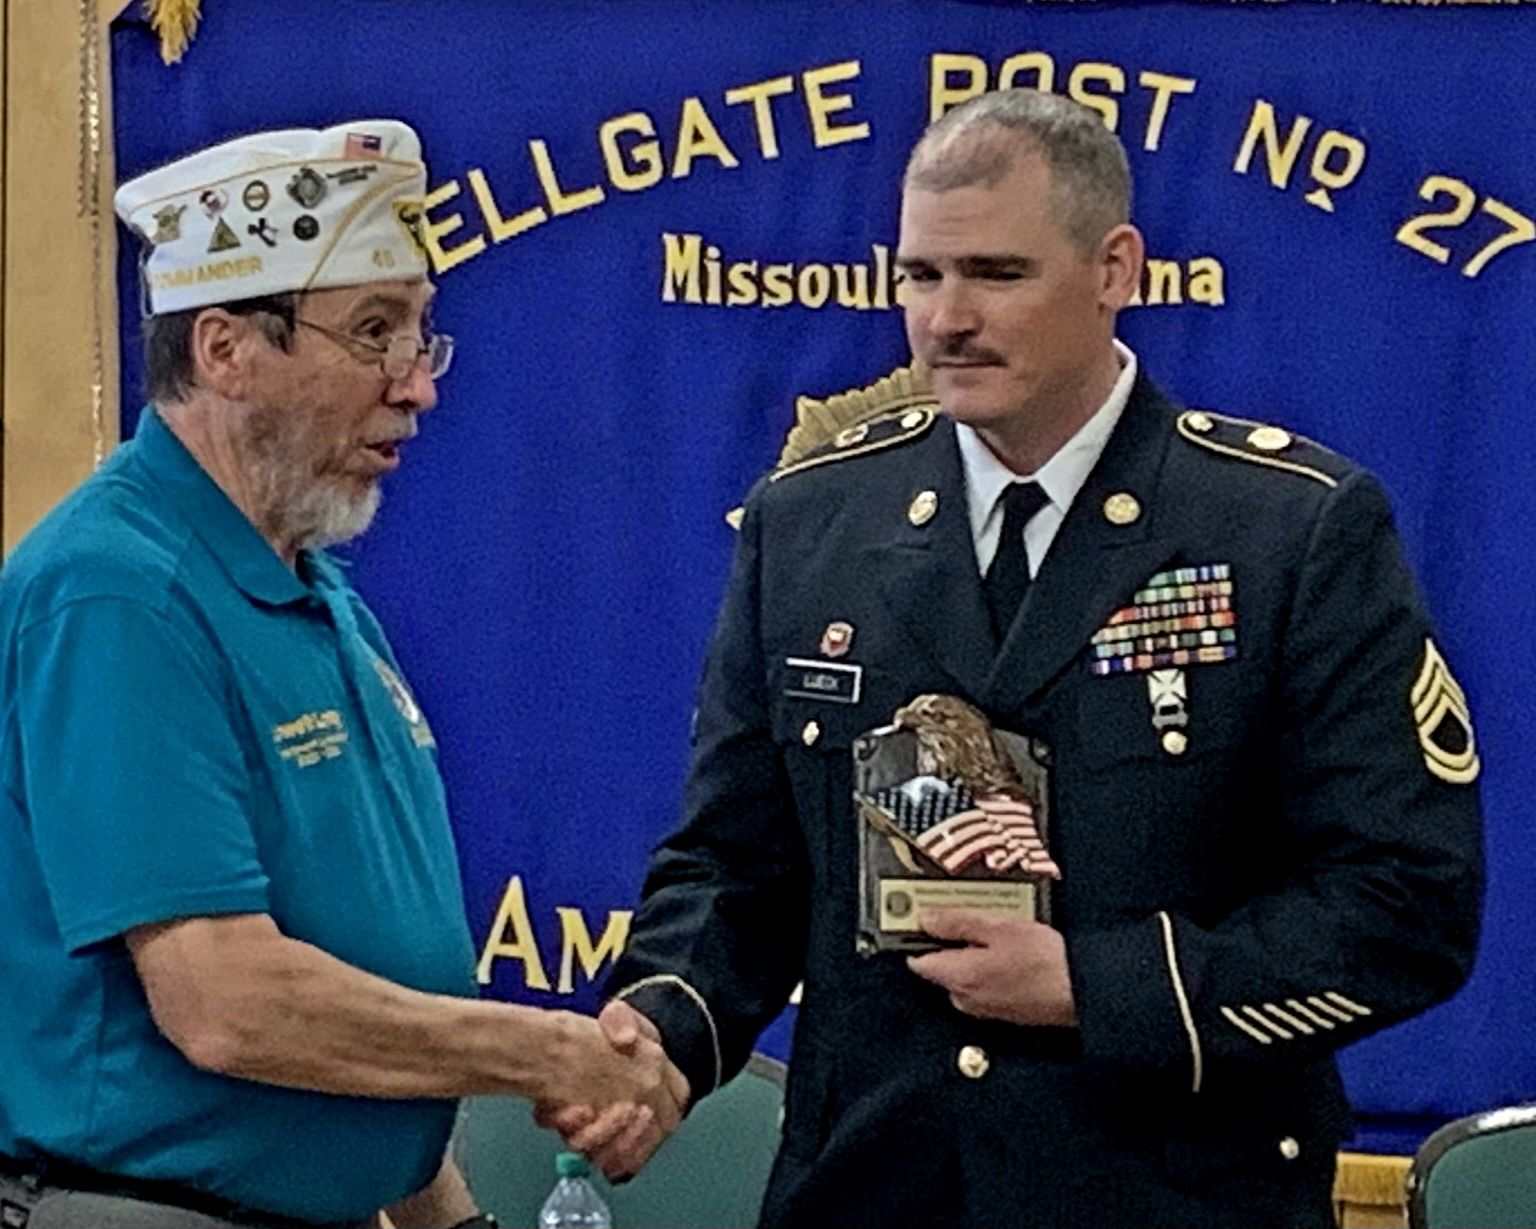 Lueck named Montana Law Enforcement Officer of Year – Bitterroot Star